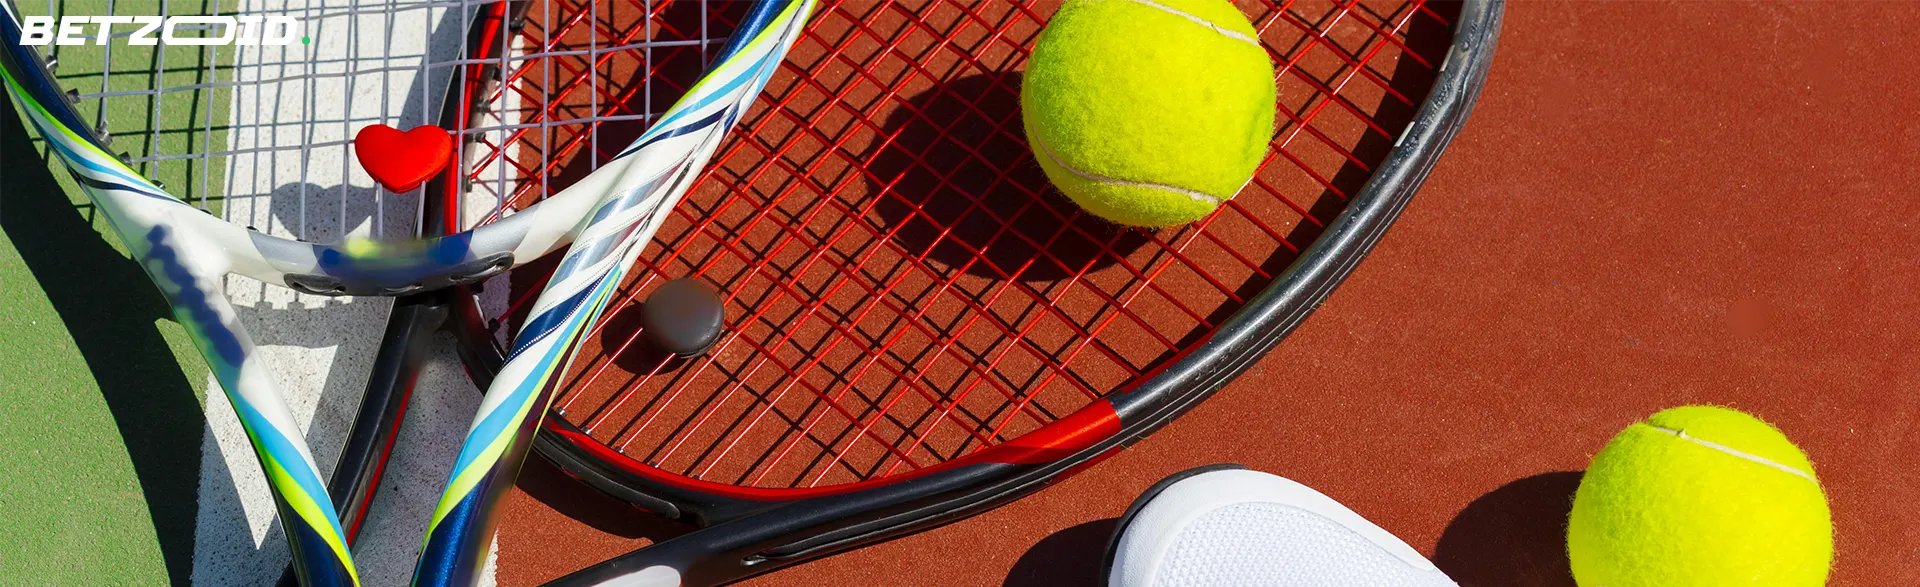 Close-up view of tennis gear on a court, capturing the readiness and excitement akin to the welcome bonuses offered by betting sites in Canada.